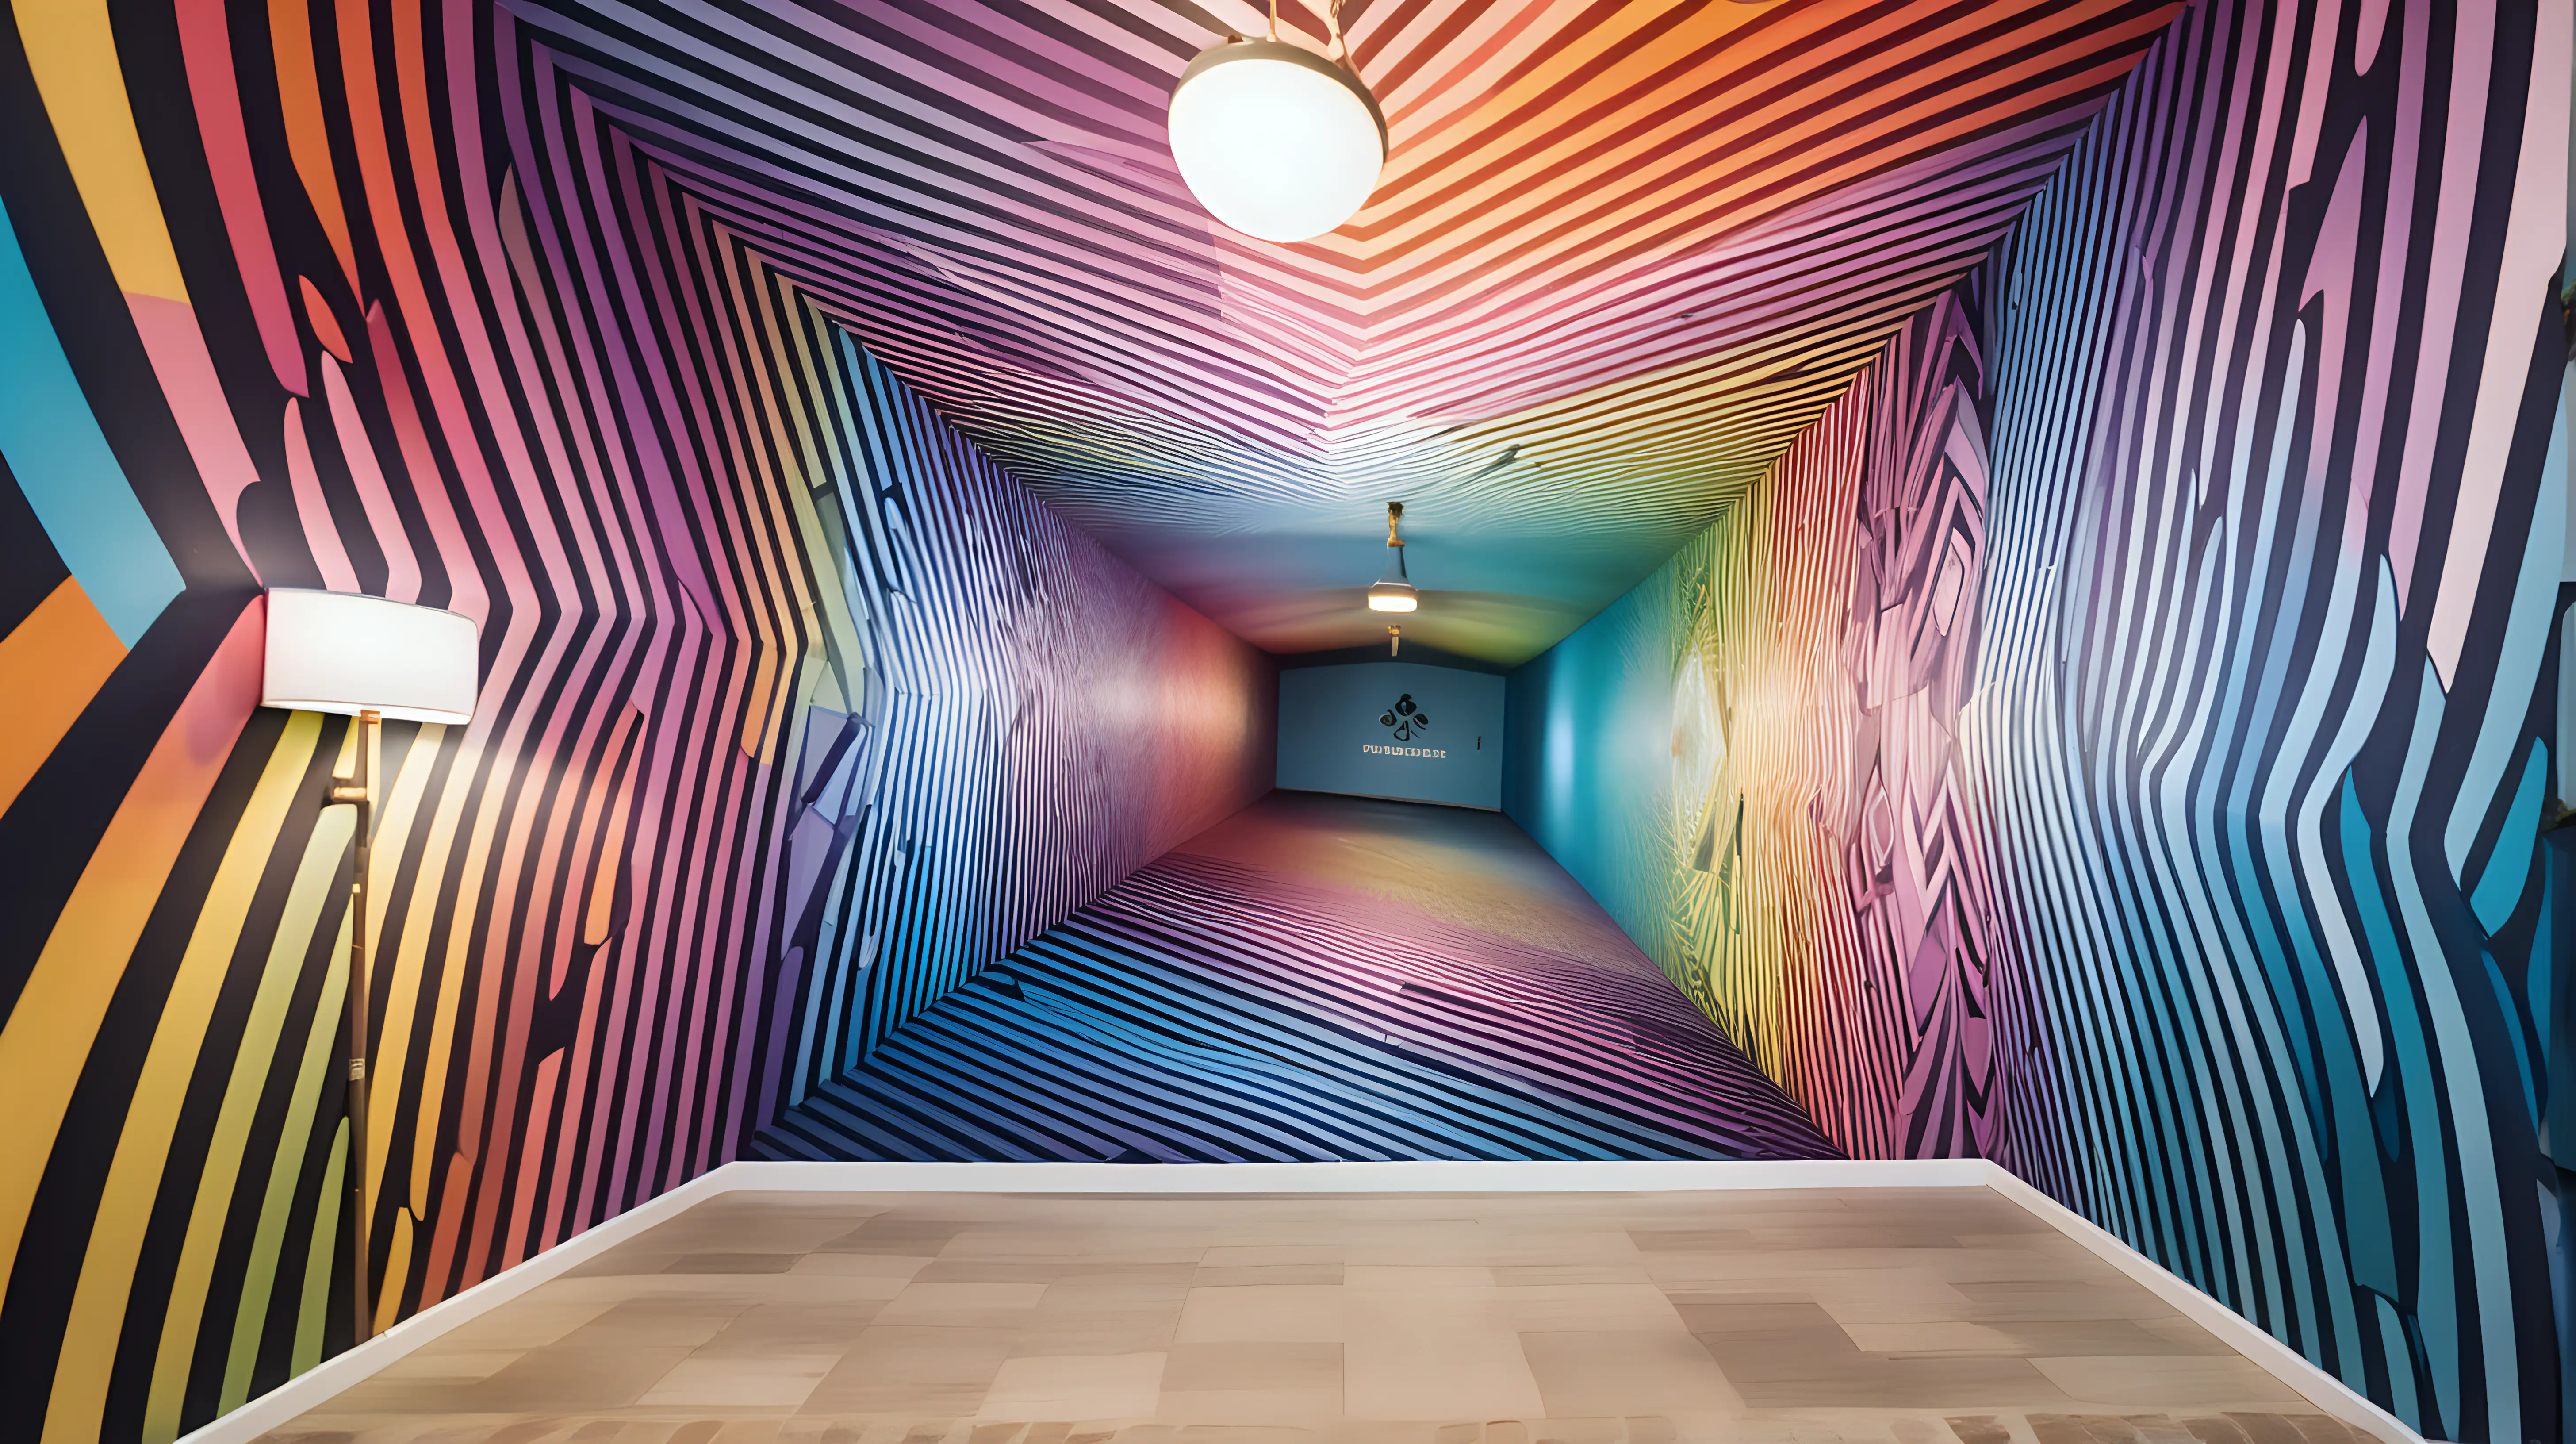 Mesmerizing Geometric Optical Illusion Mural Dynamic Perspective and Shifting Patterns